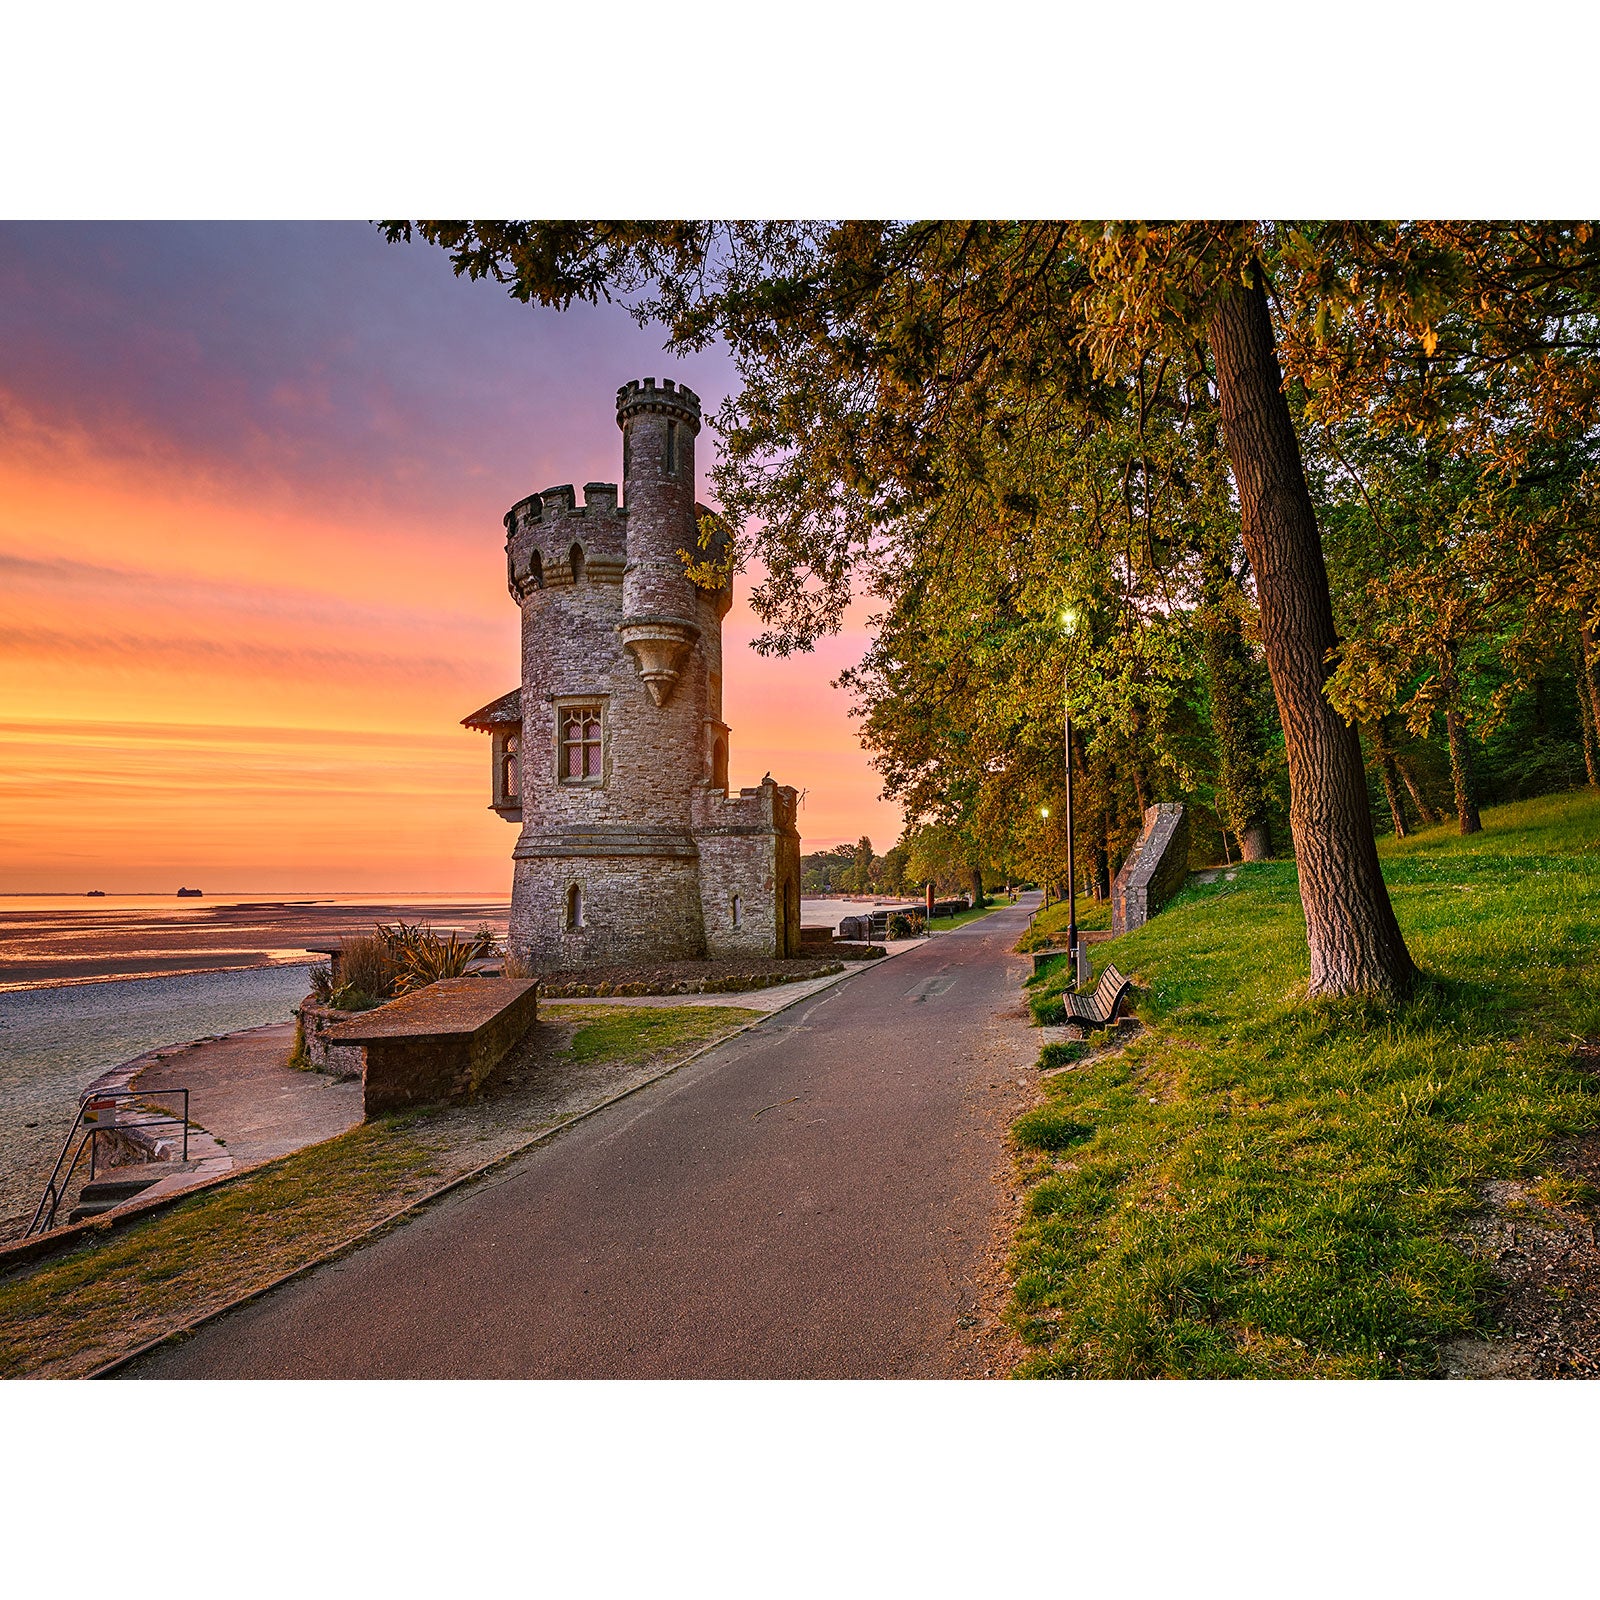 Historic Appley Tower by a path at sunrise captured by Available Light Photography.